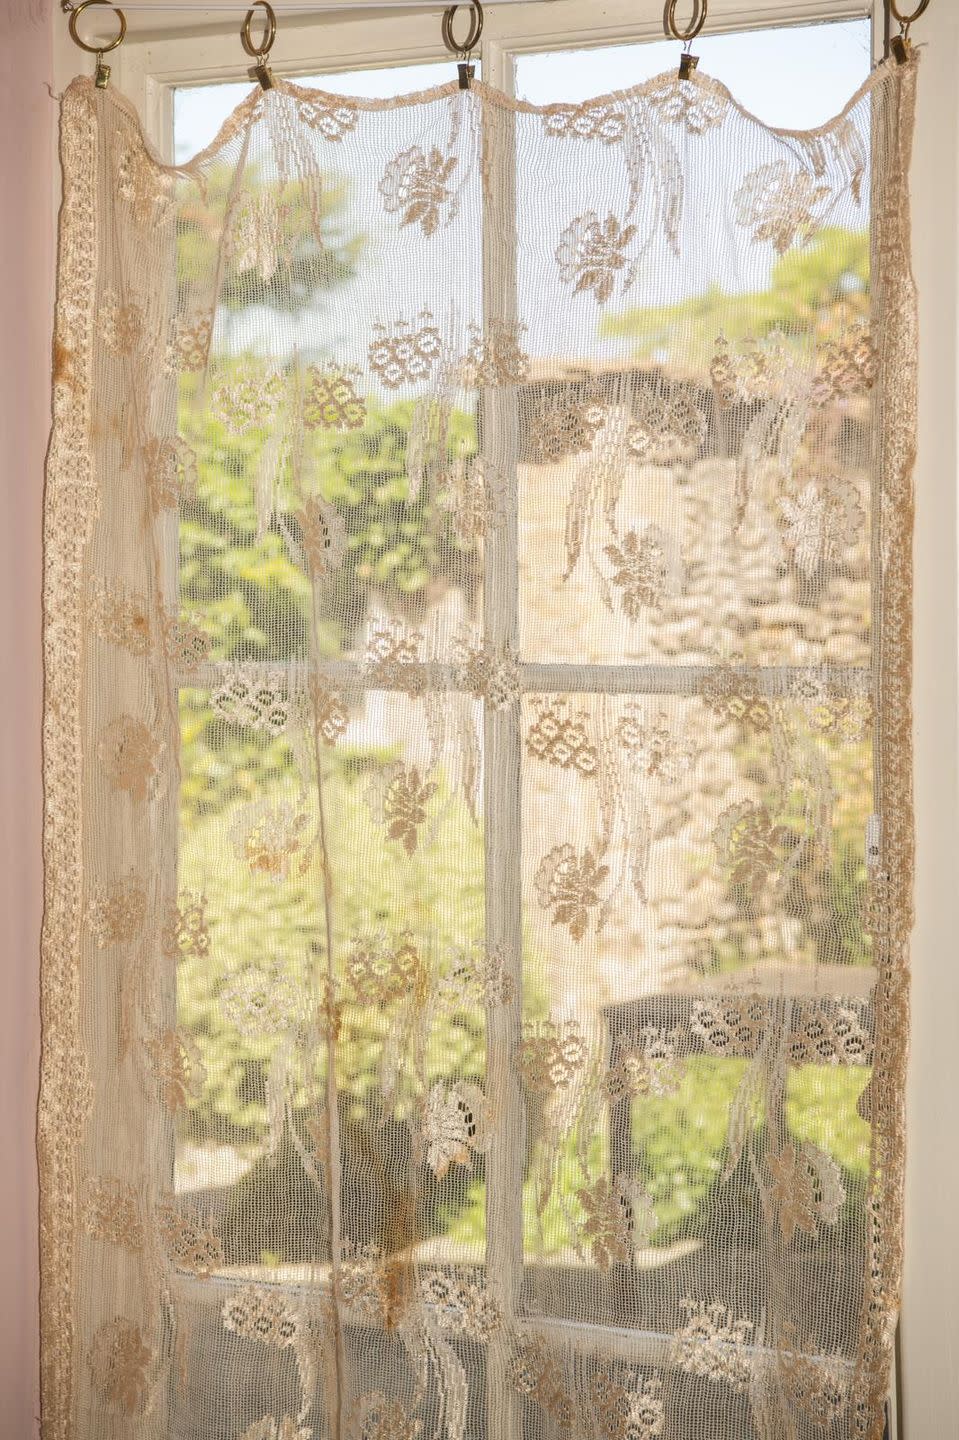 lace hanging in pearl's home